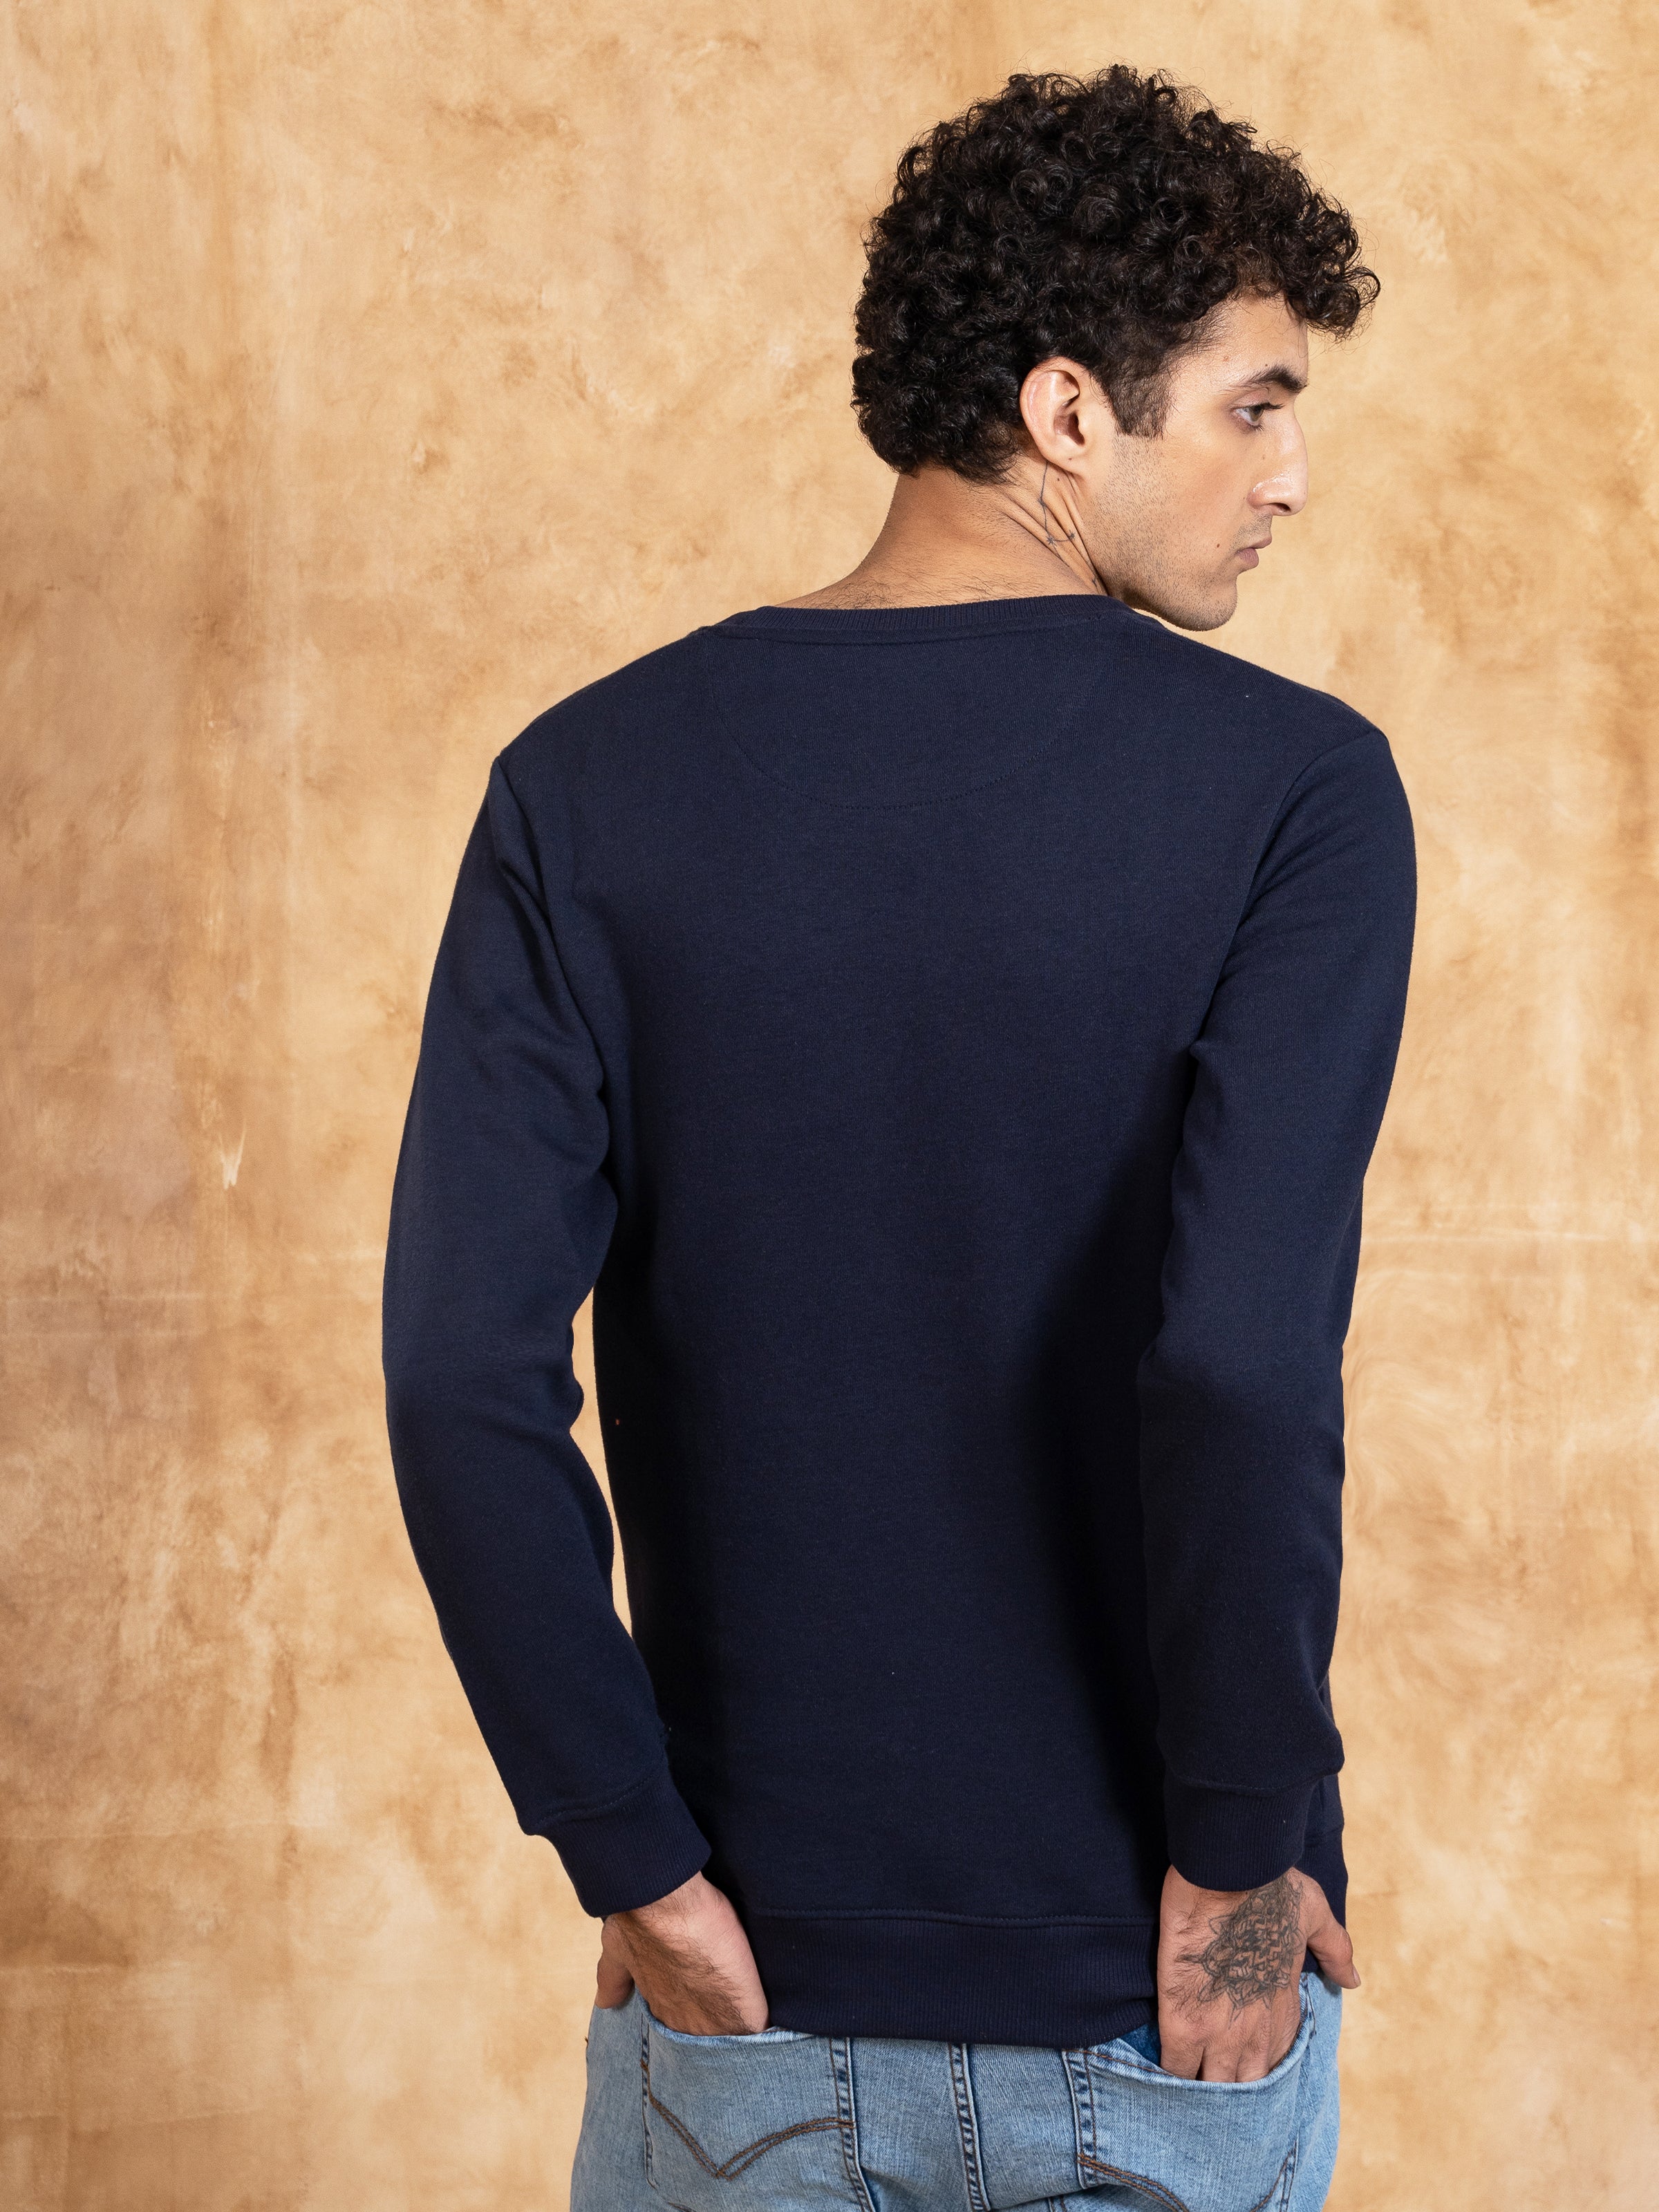 SWEAT SHIRT ROUND NECK EMBROIDED NAVY